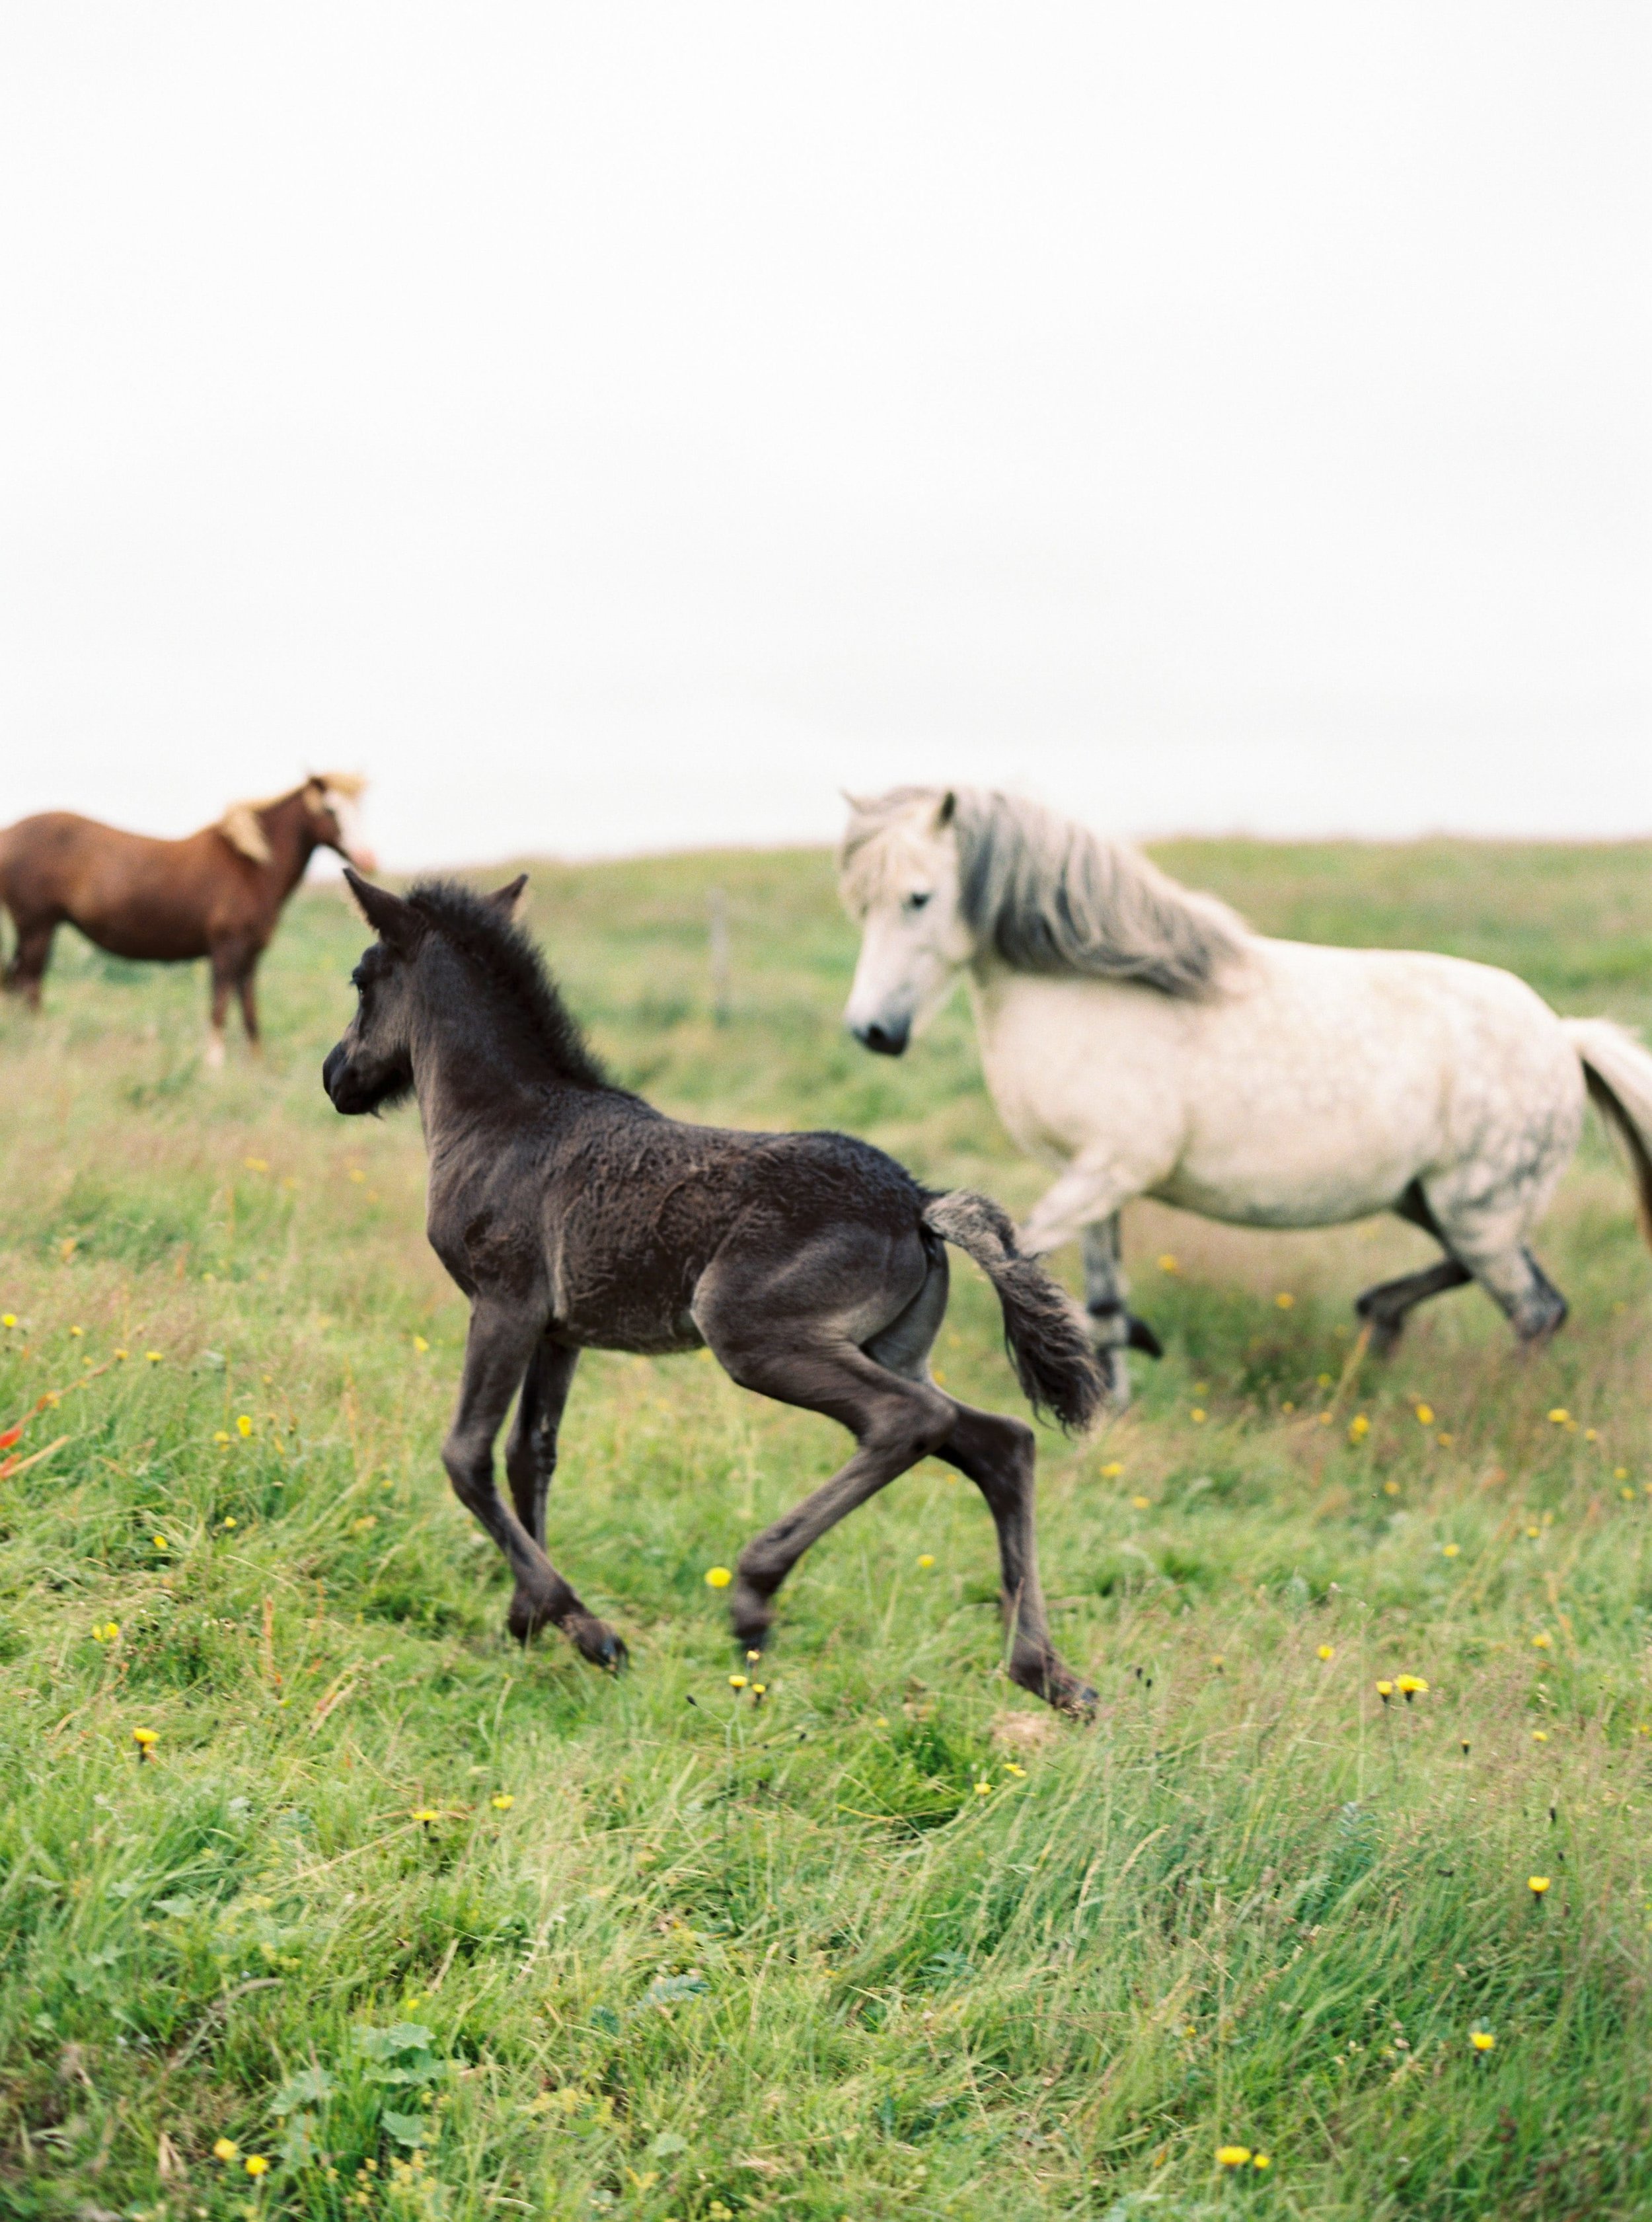 Horses in Iceland by Kristin Sweeting now on Cottage Hill80.jpg